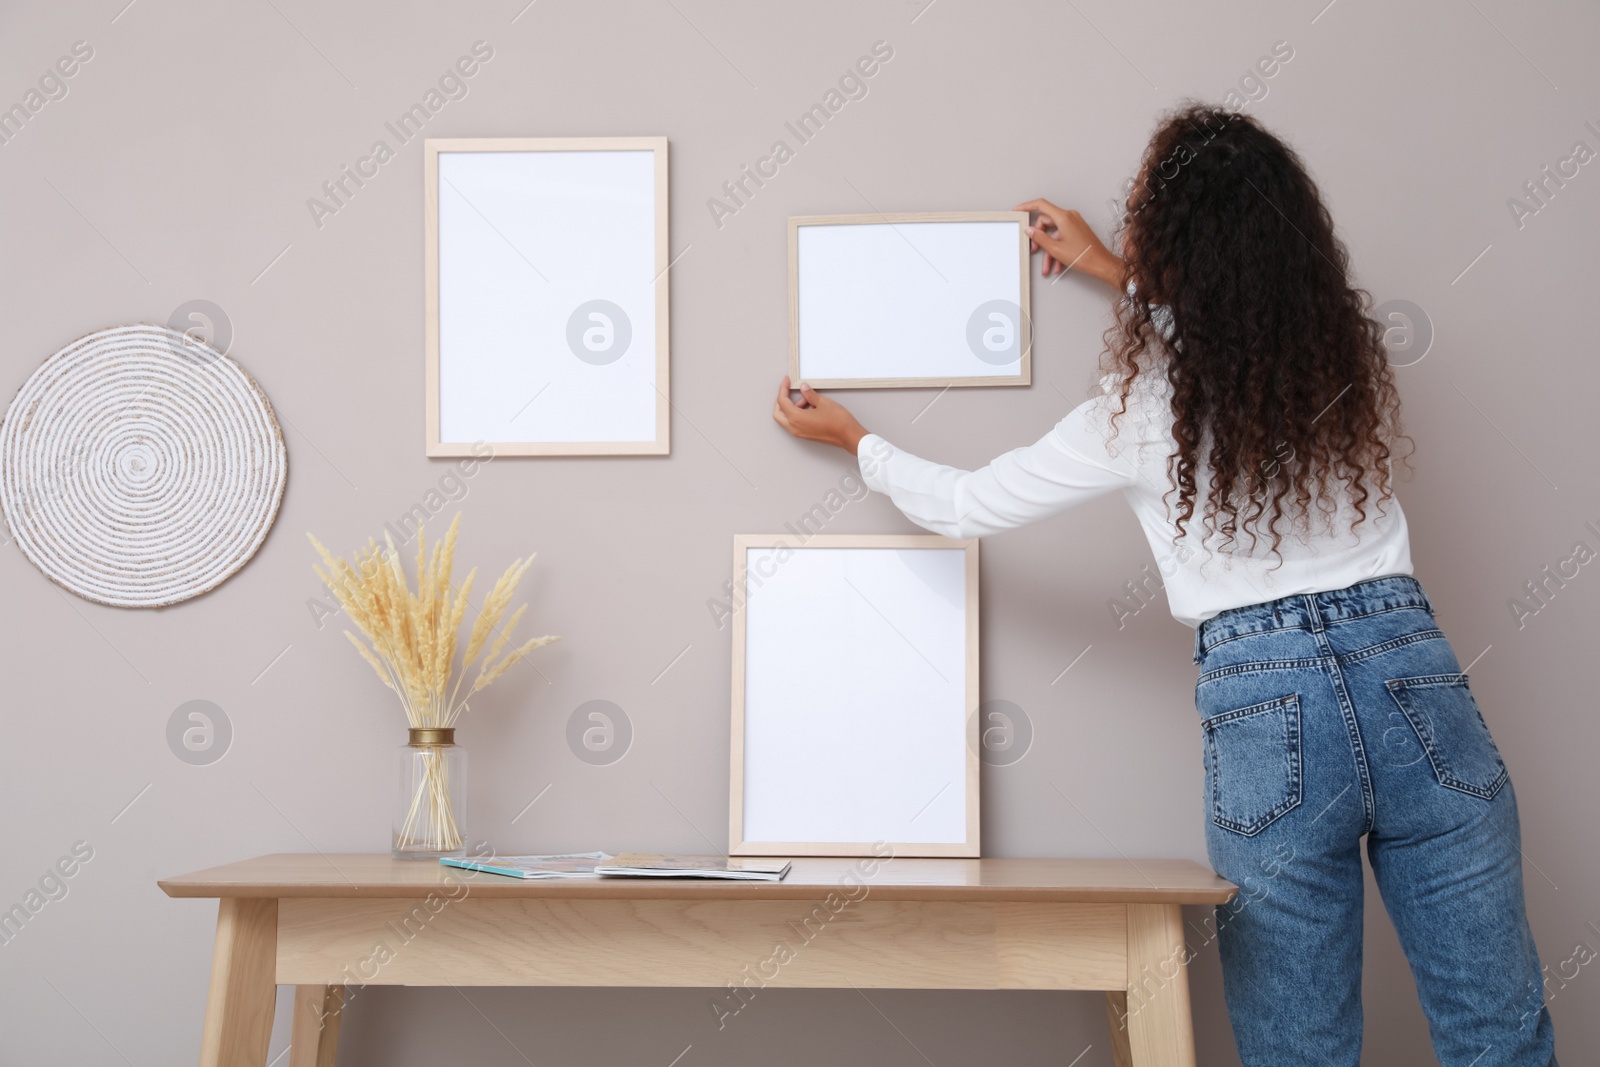 Photo of African American woman hanging empty frame on pale rose wall over table in room, back view. Mockup for design